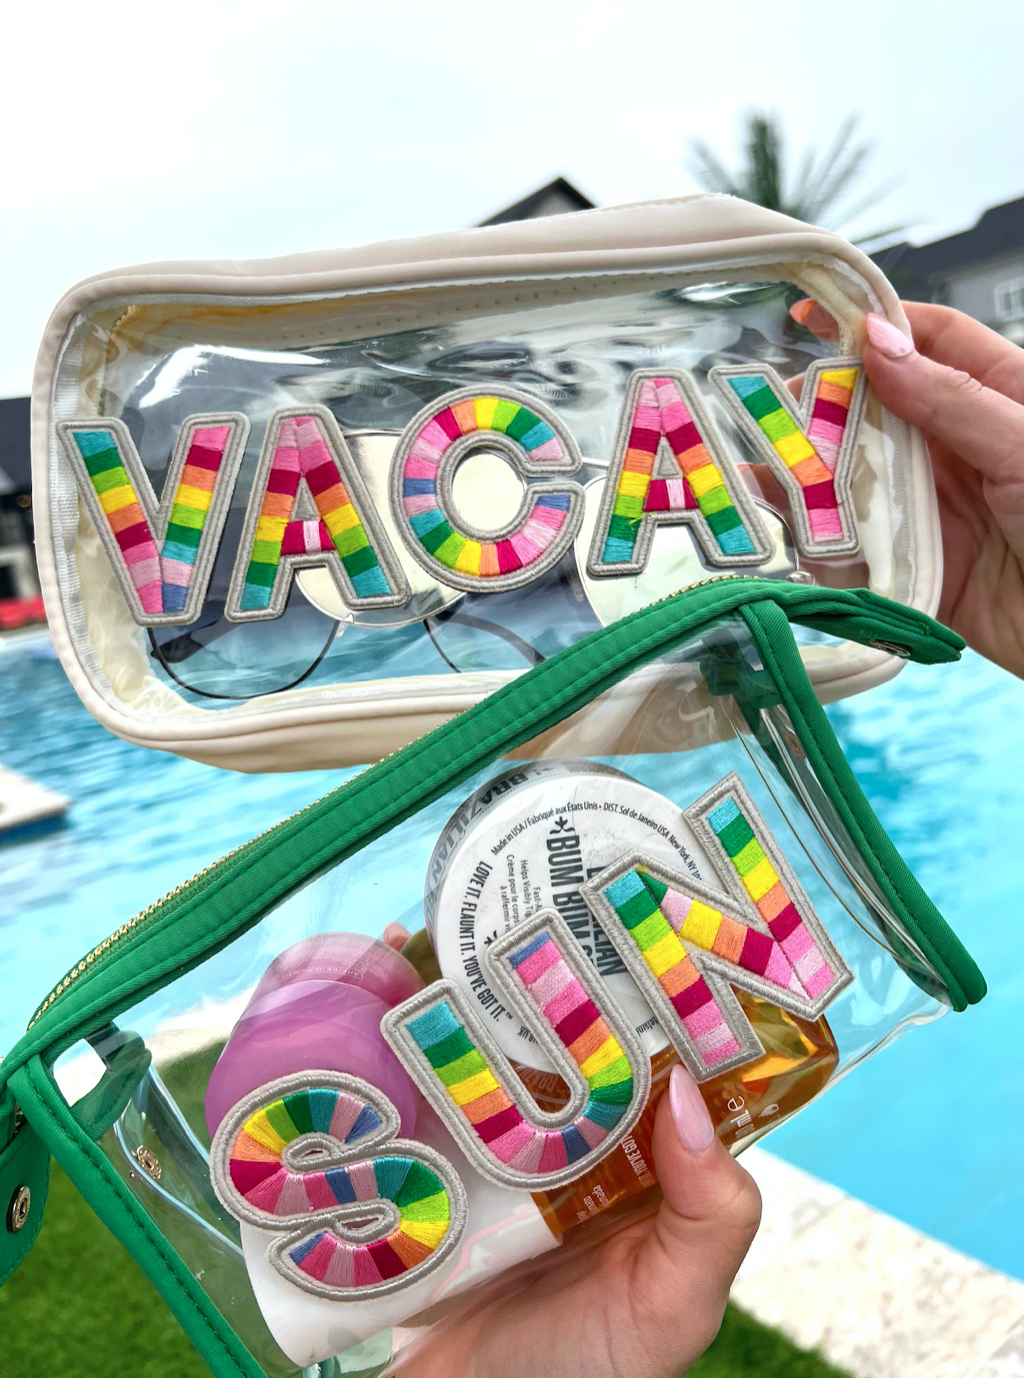 Vacay Clear Bag - Rainbow Patches